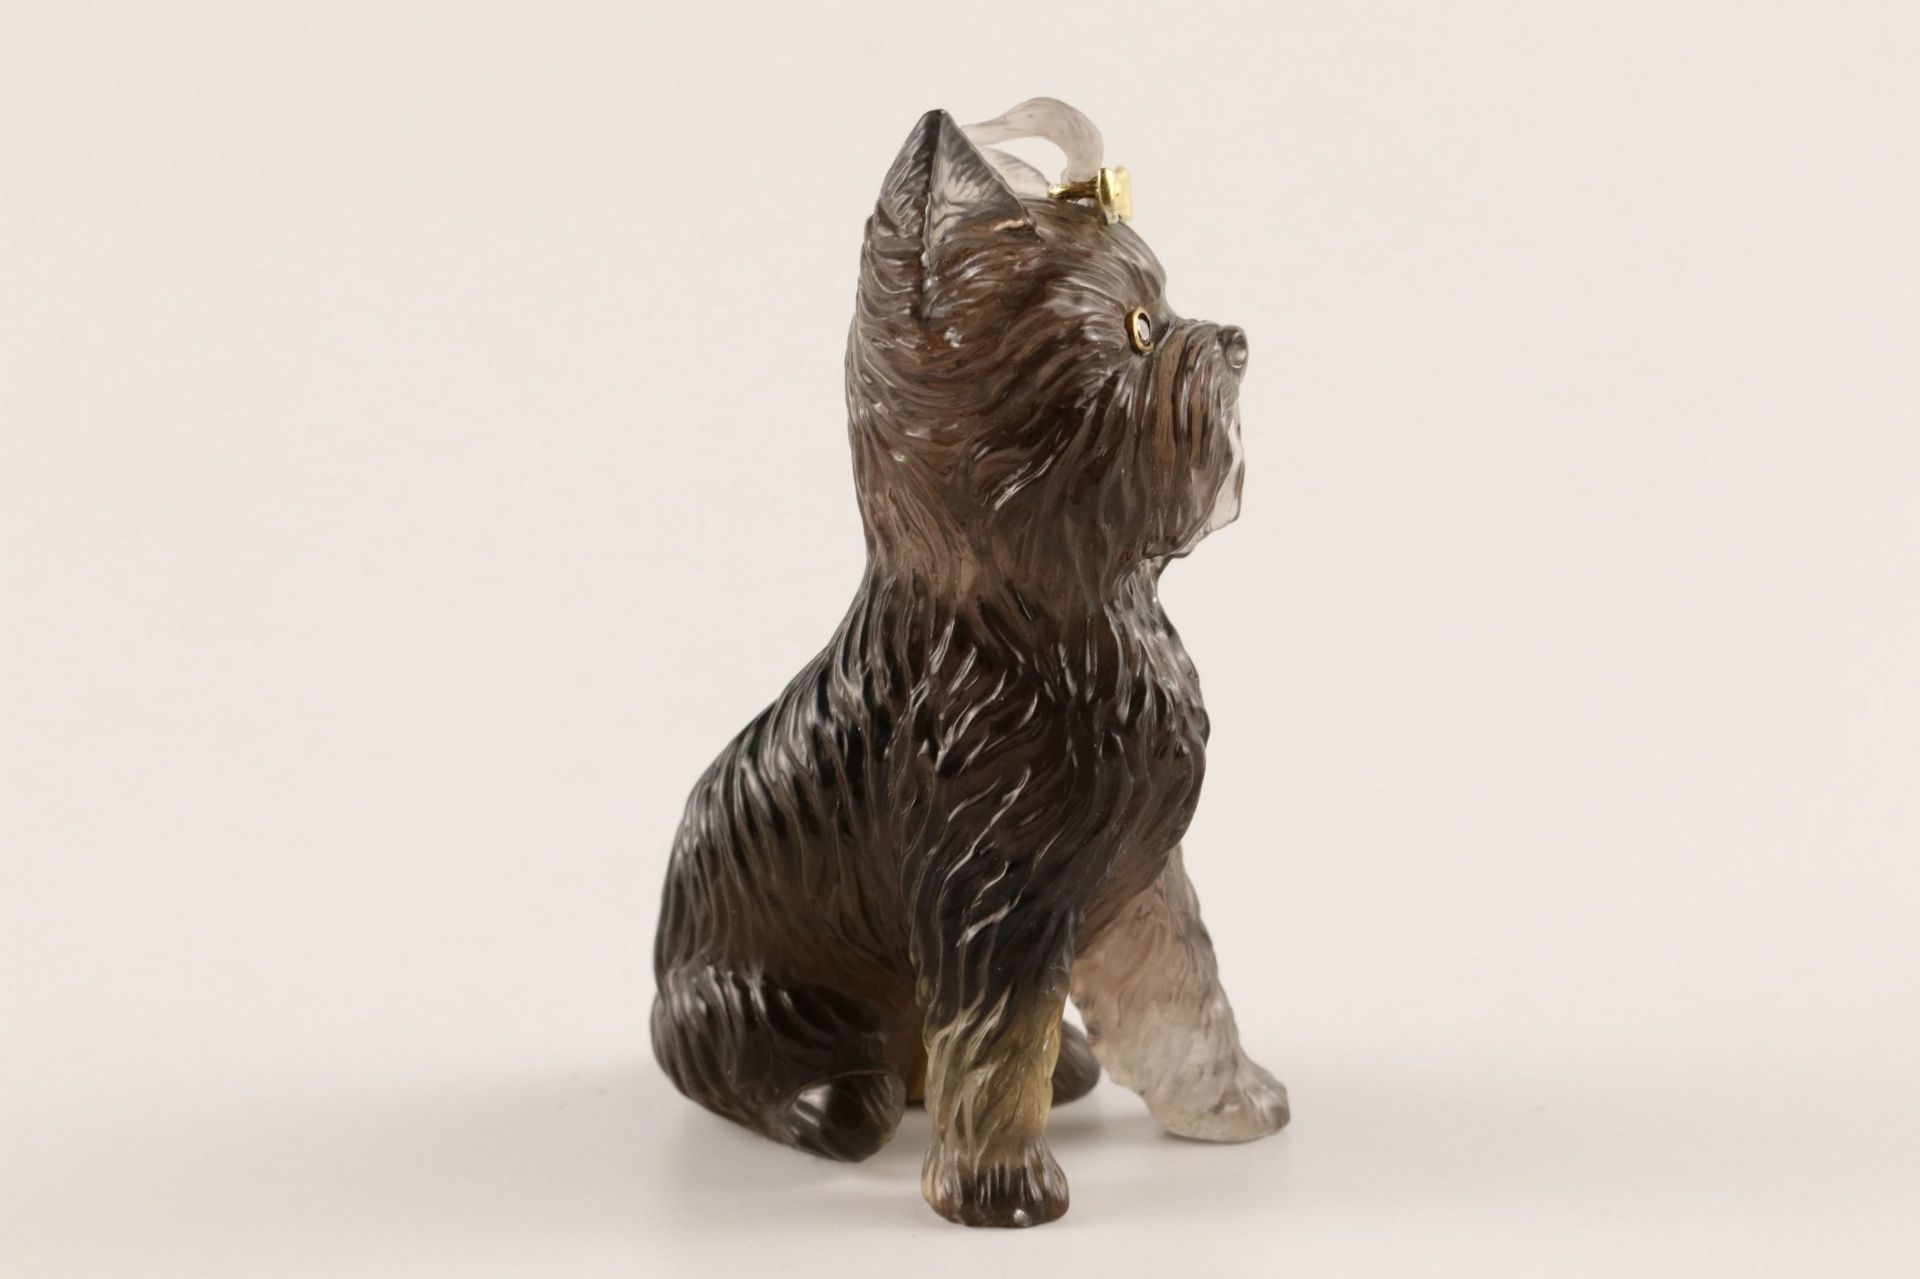 Stone-cut figurine Yorkshire Terrier in the style of Faberge 20th century. - Image 3 of 5